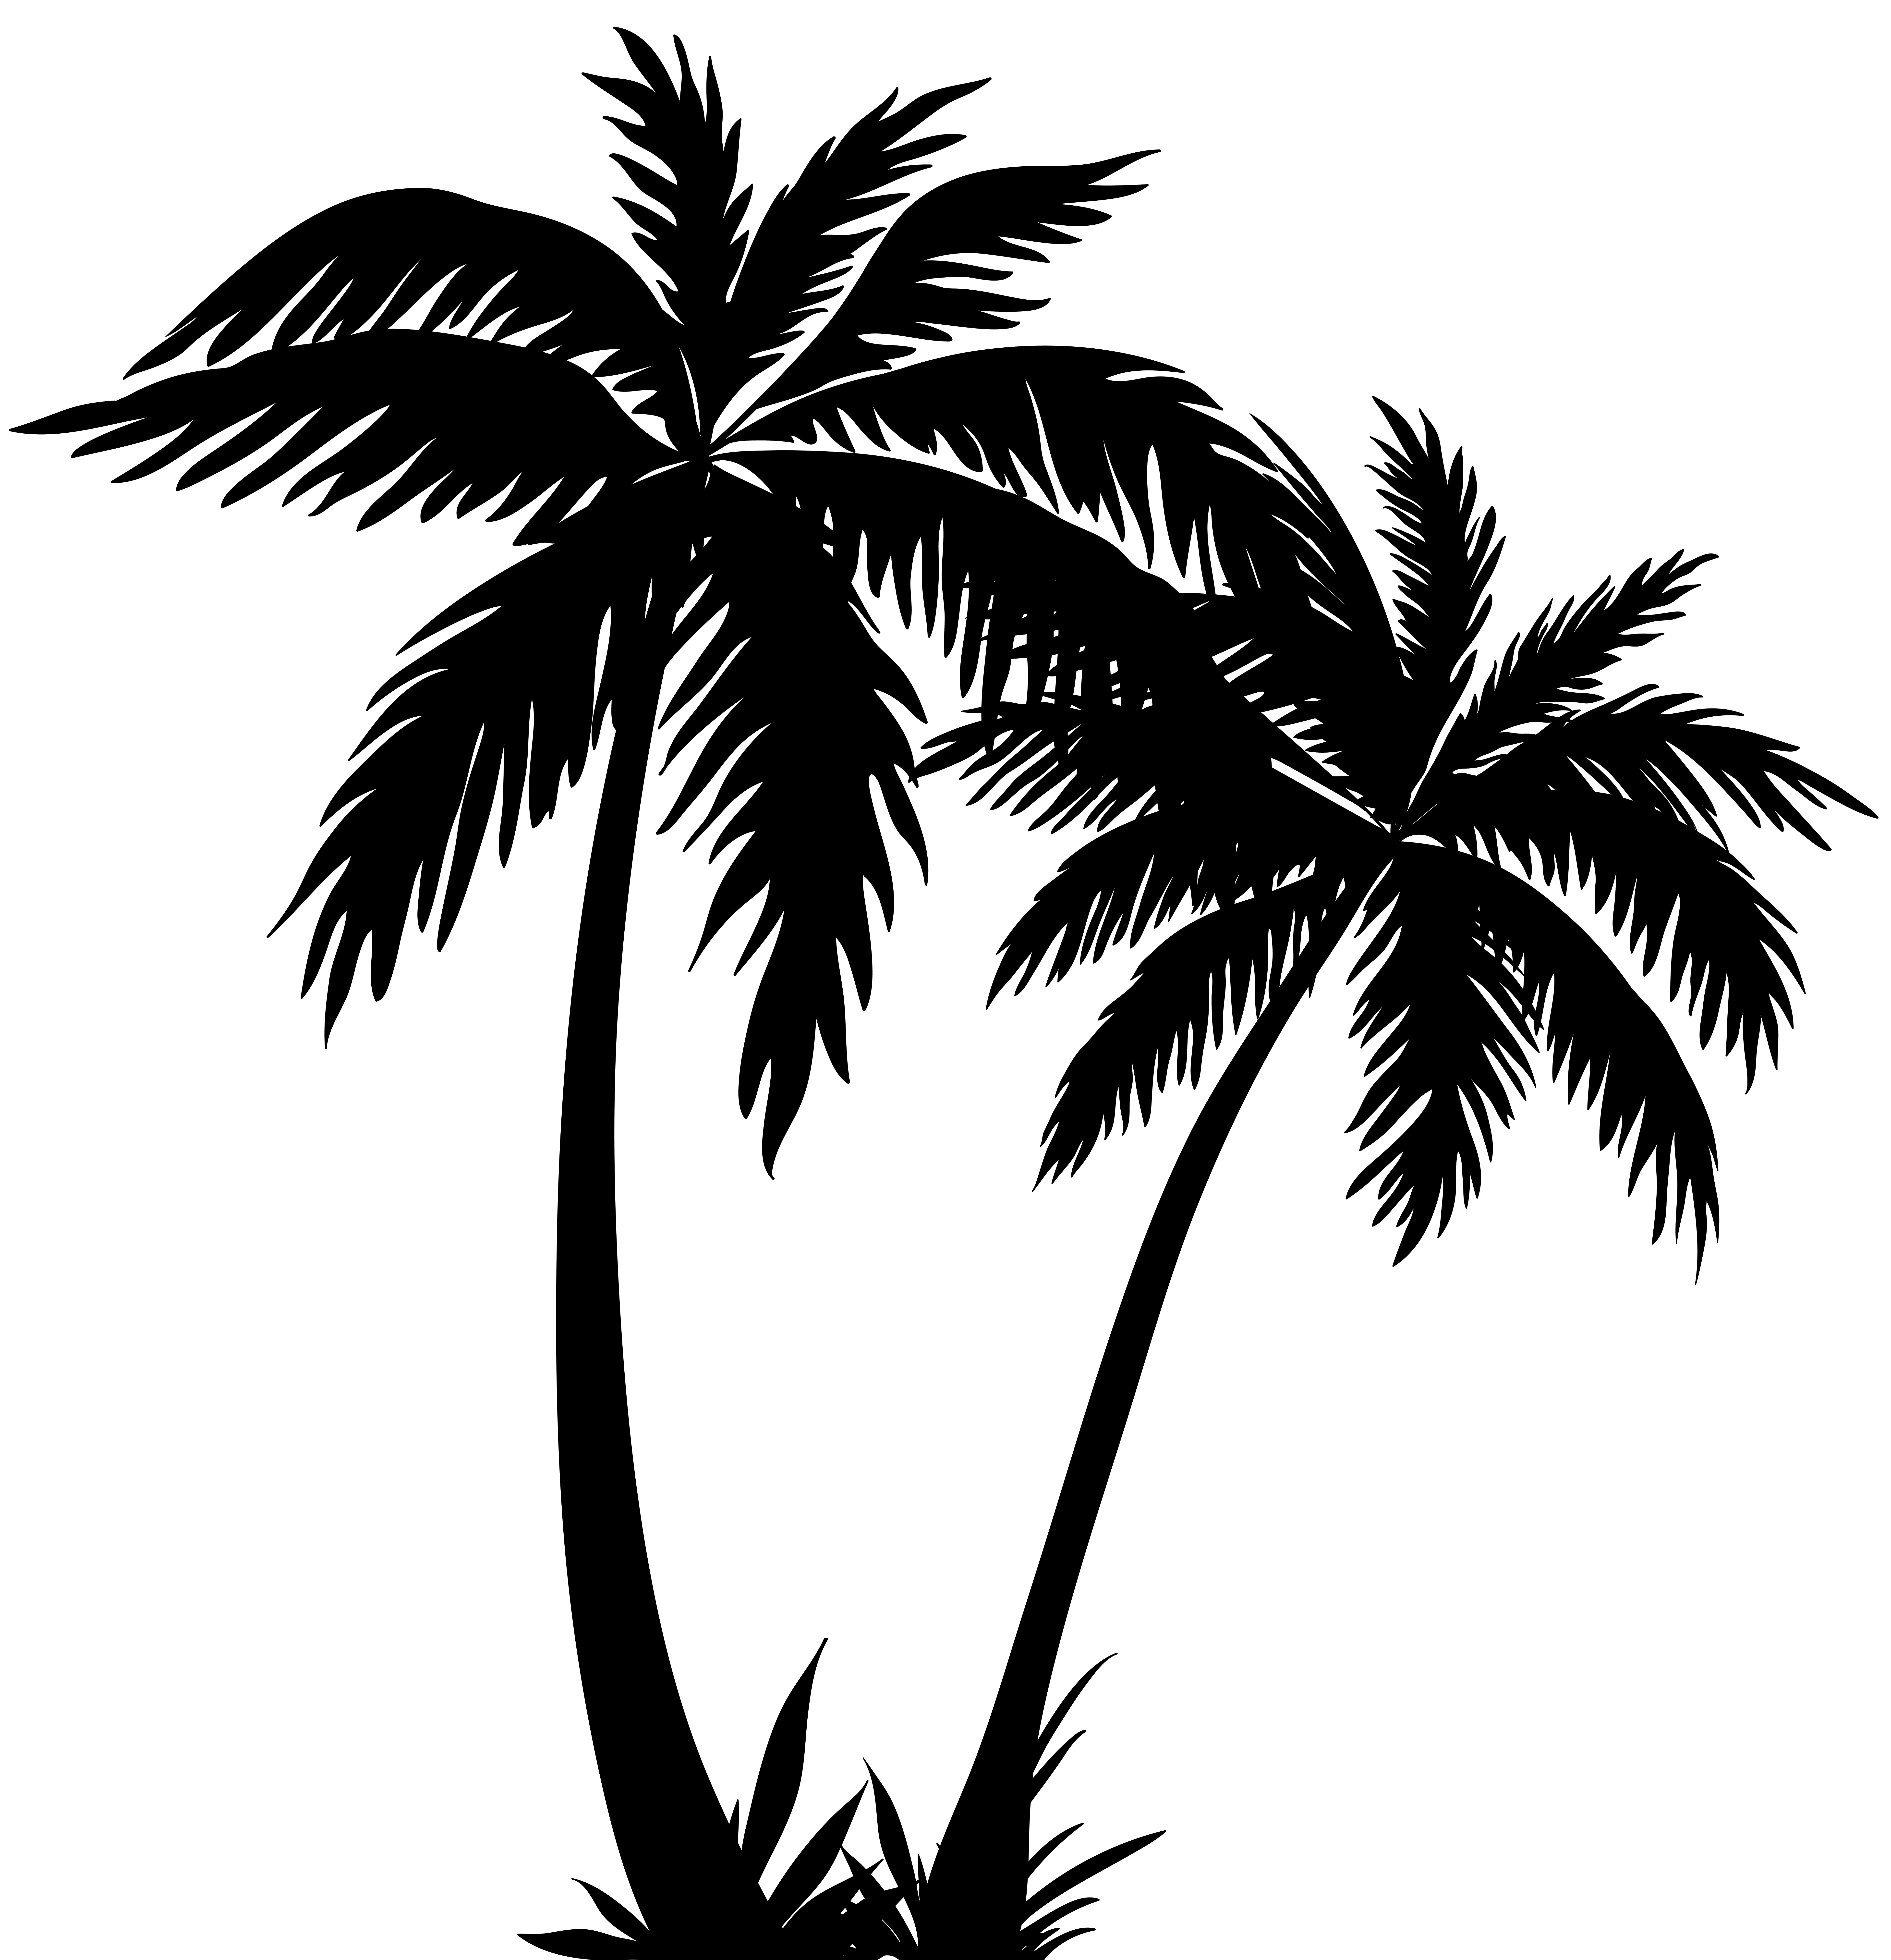 Black and White Palm Tree Logo - Palm Tree Black And White Logo Craft Designs And Ideas Within Black ...